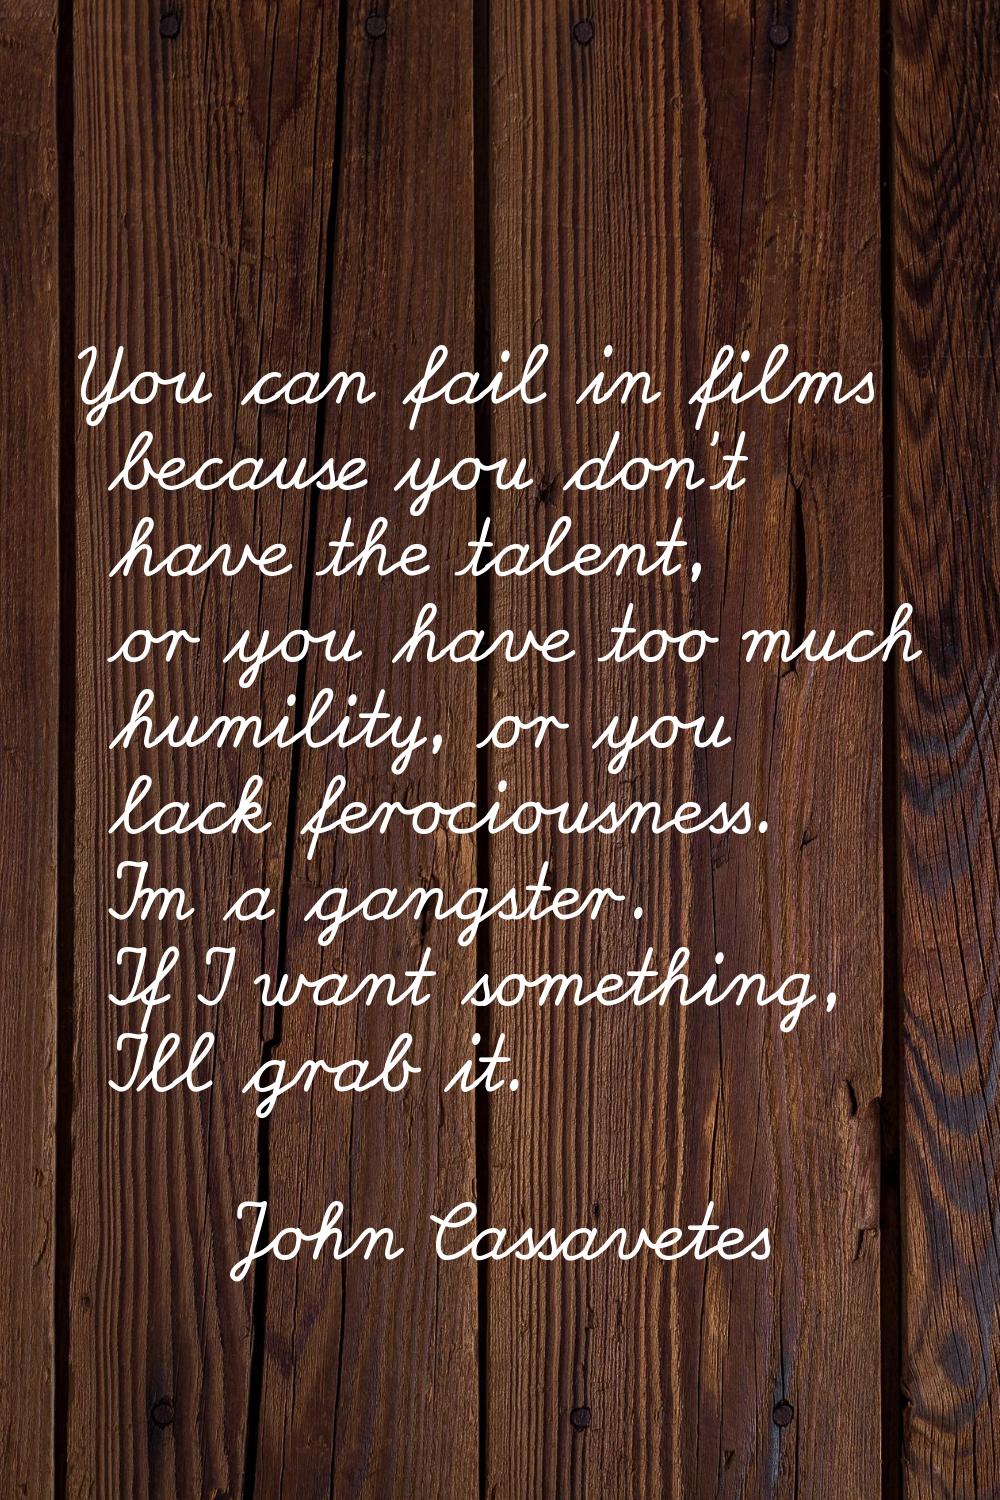 You can fail in films because you don't have the talent, or you have too much humility, or you lack